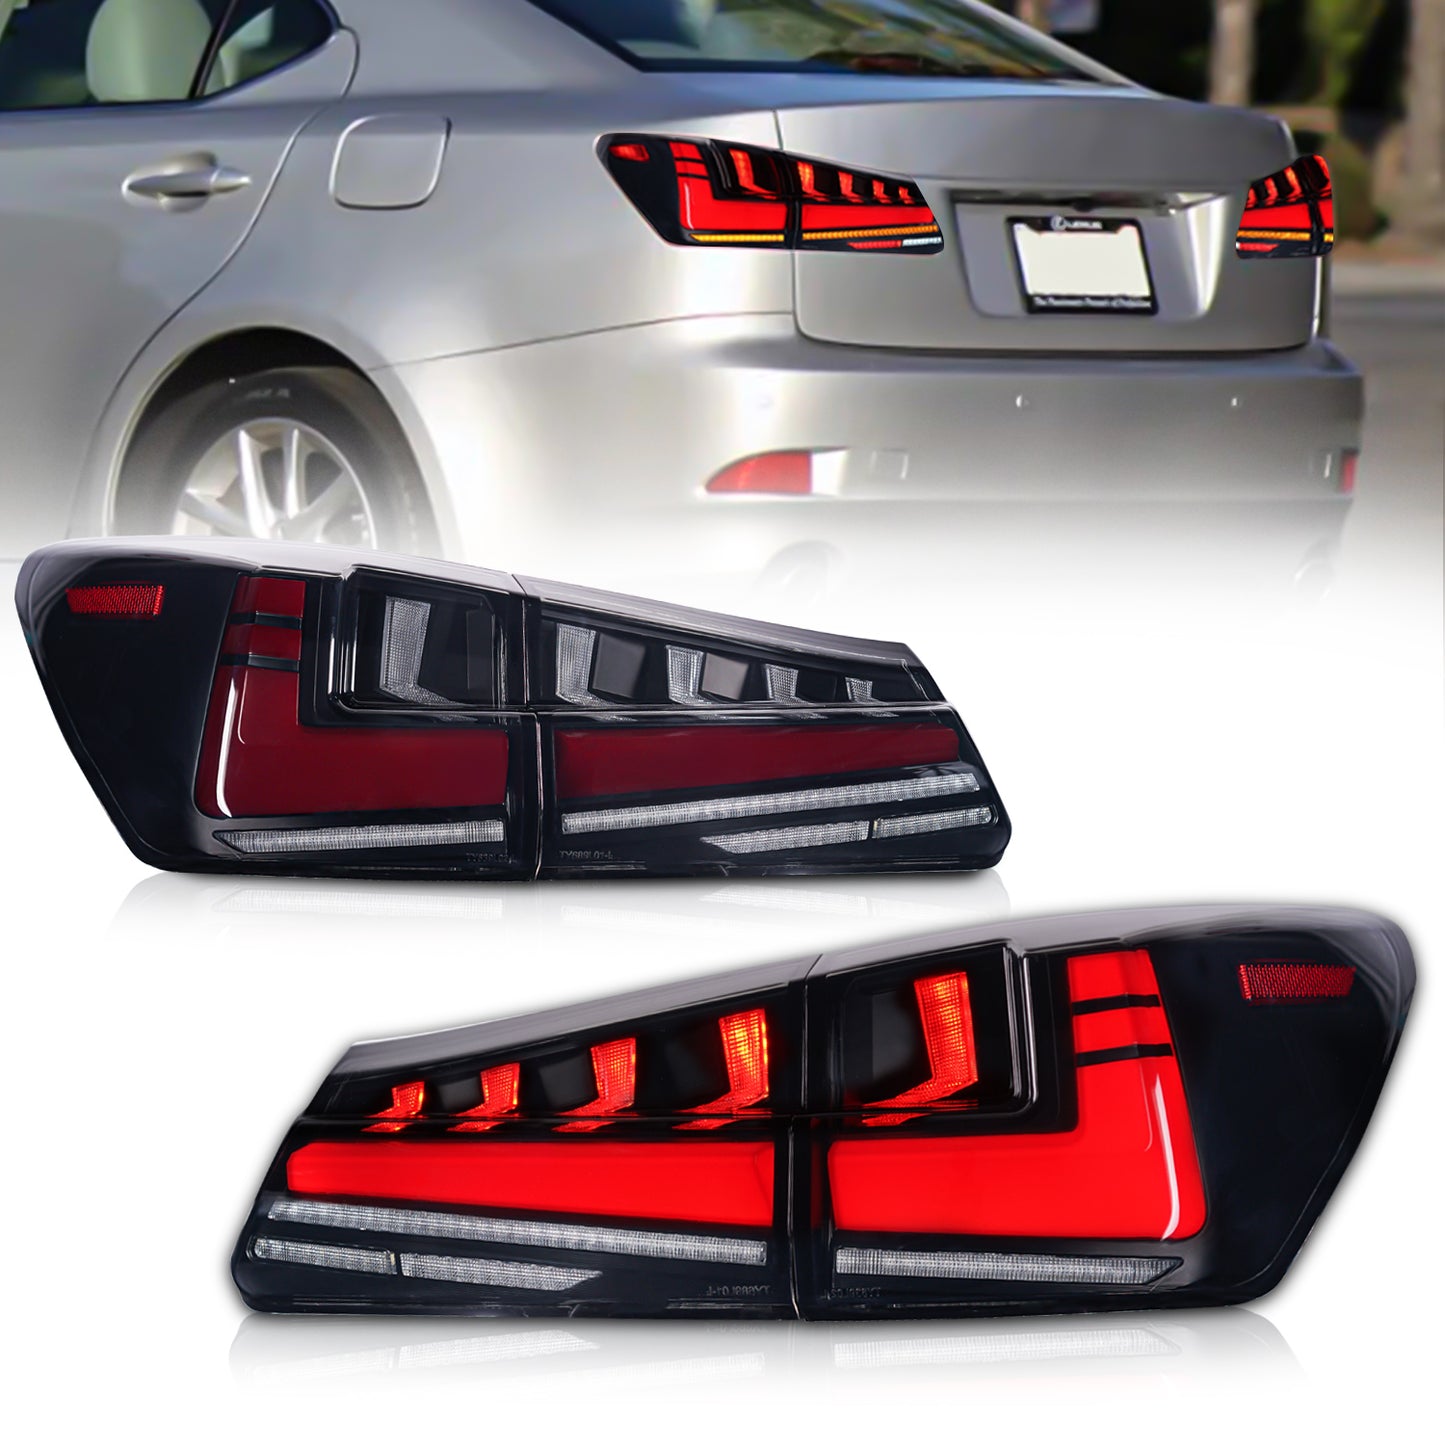 Full LED Tail Lights Assembly For Lexus IS250 2006-2012